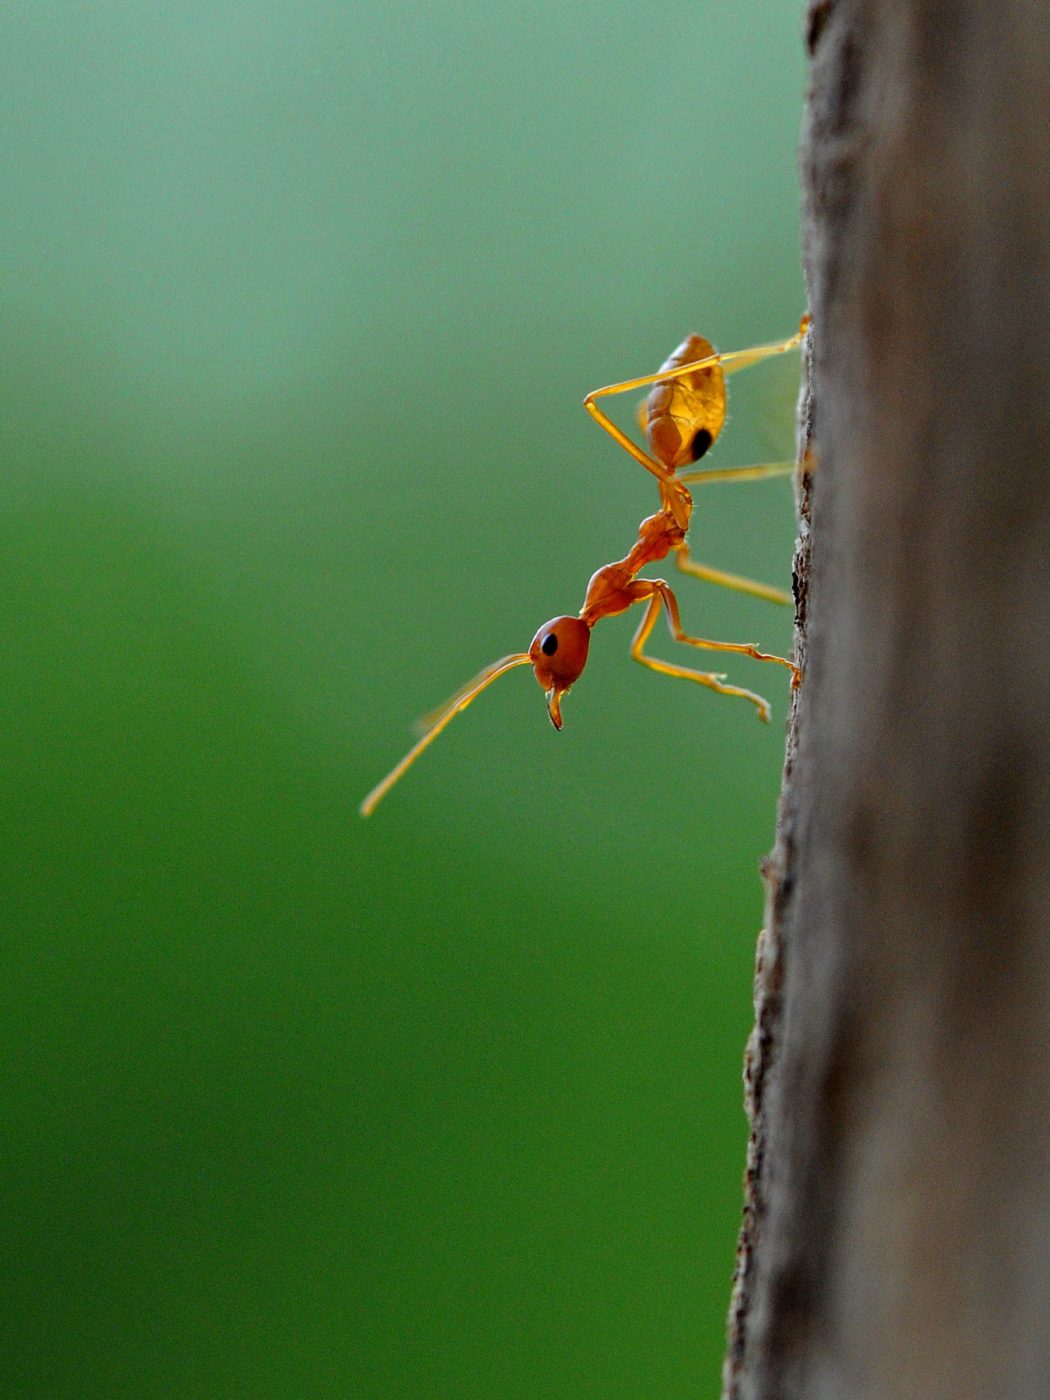 Weaver ant (possibly Oecophylla smaragdina) photographed in forest habitat near Pavagadh, over 30km from Vadodara,